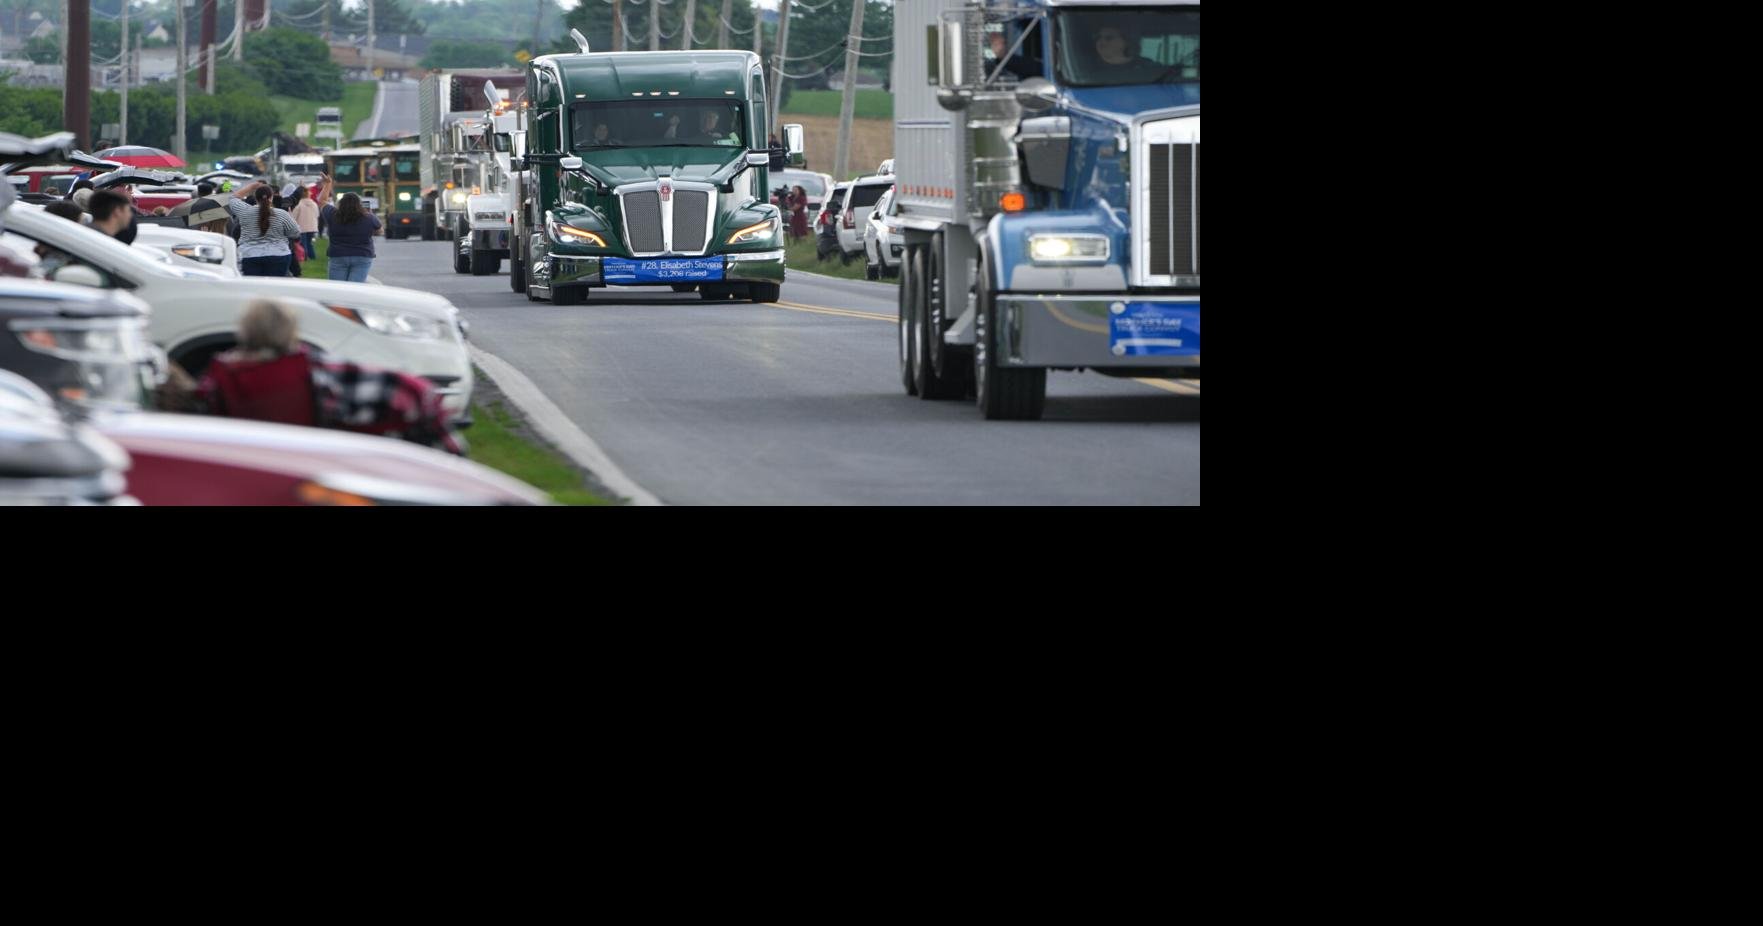 380 trucks participated in the 35th Mother’s Day Truck Convoy in Manheim this weekend – LNP | LancasterOnline